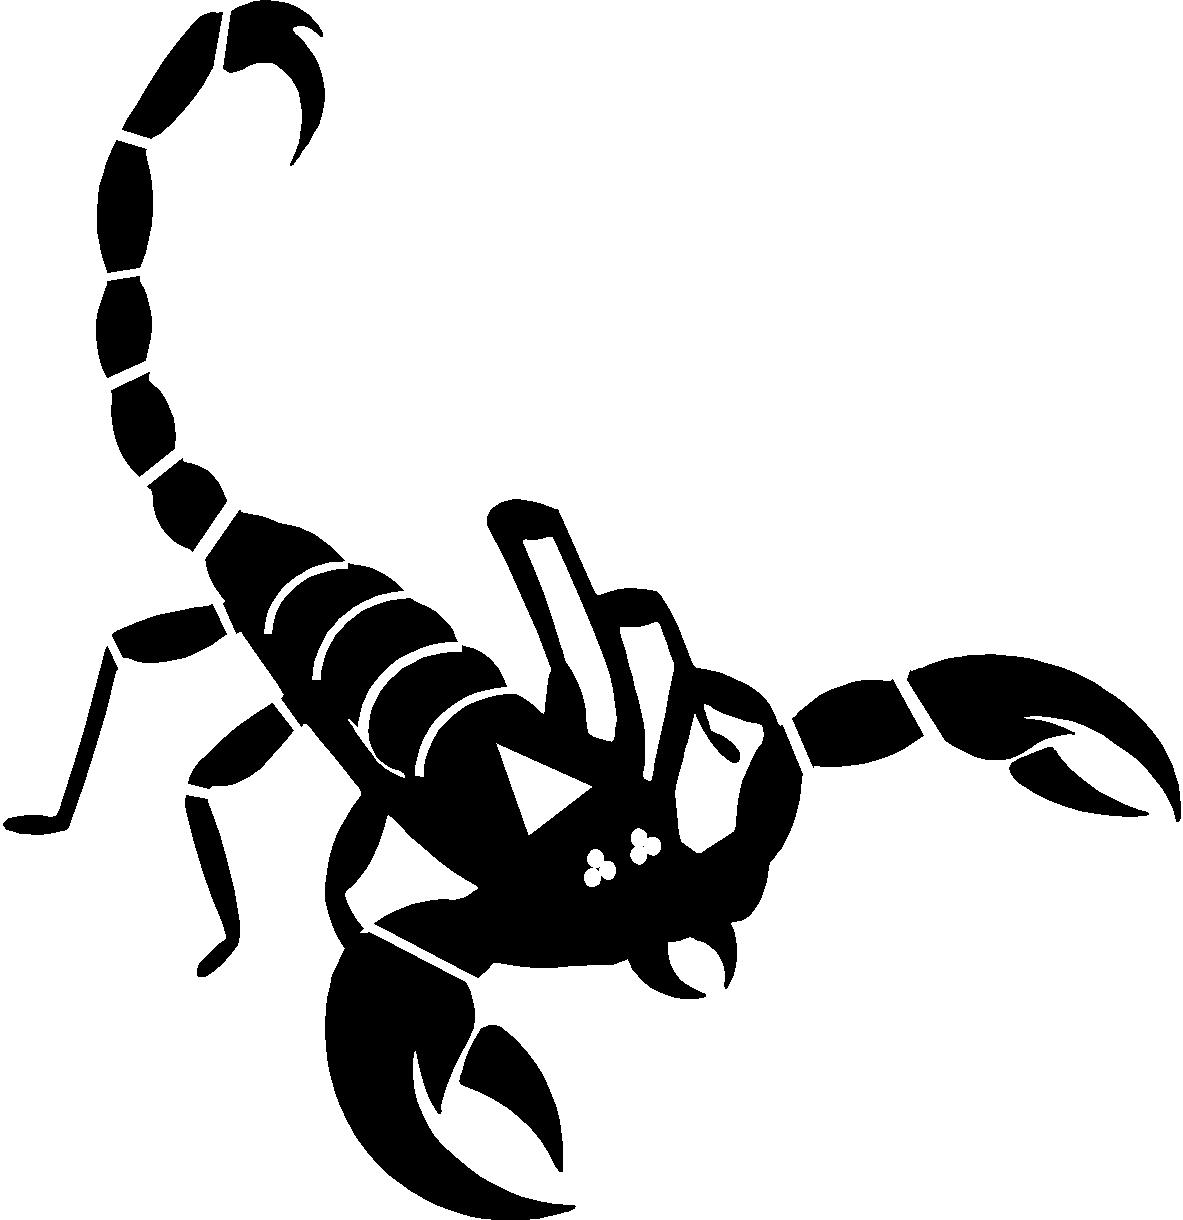 Scorpion   Free Images At Clker Com   Vector Clip Art Online Royalty